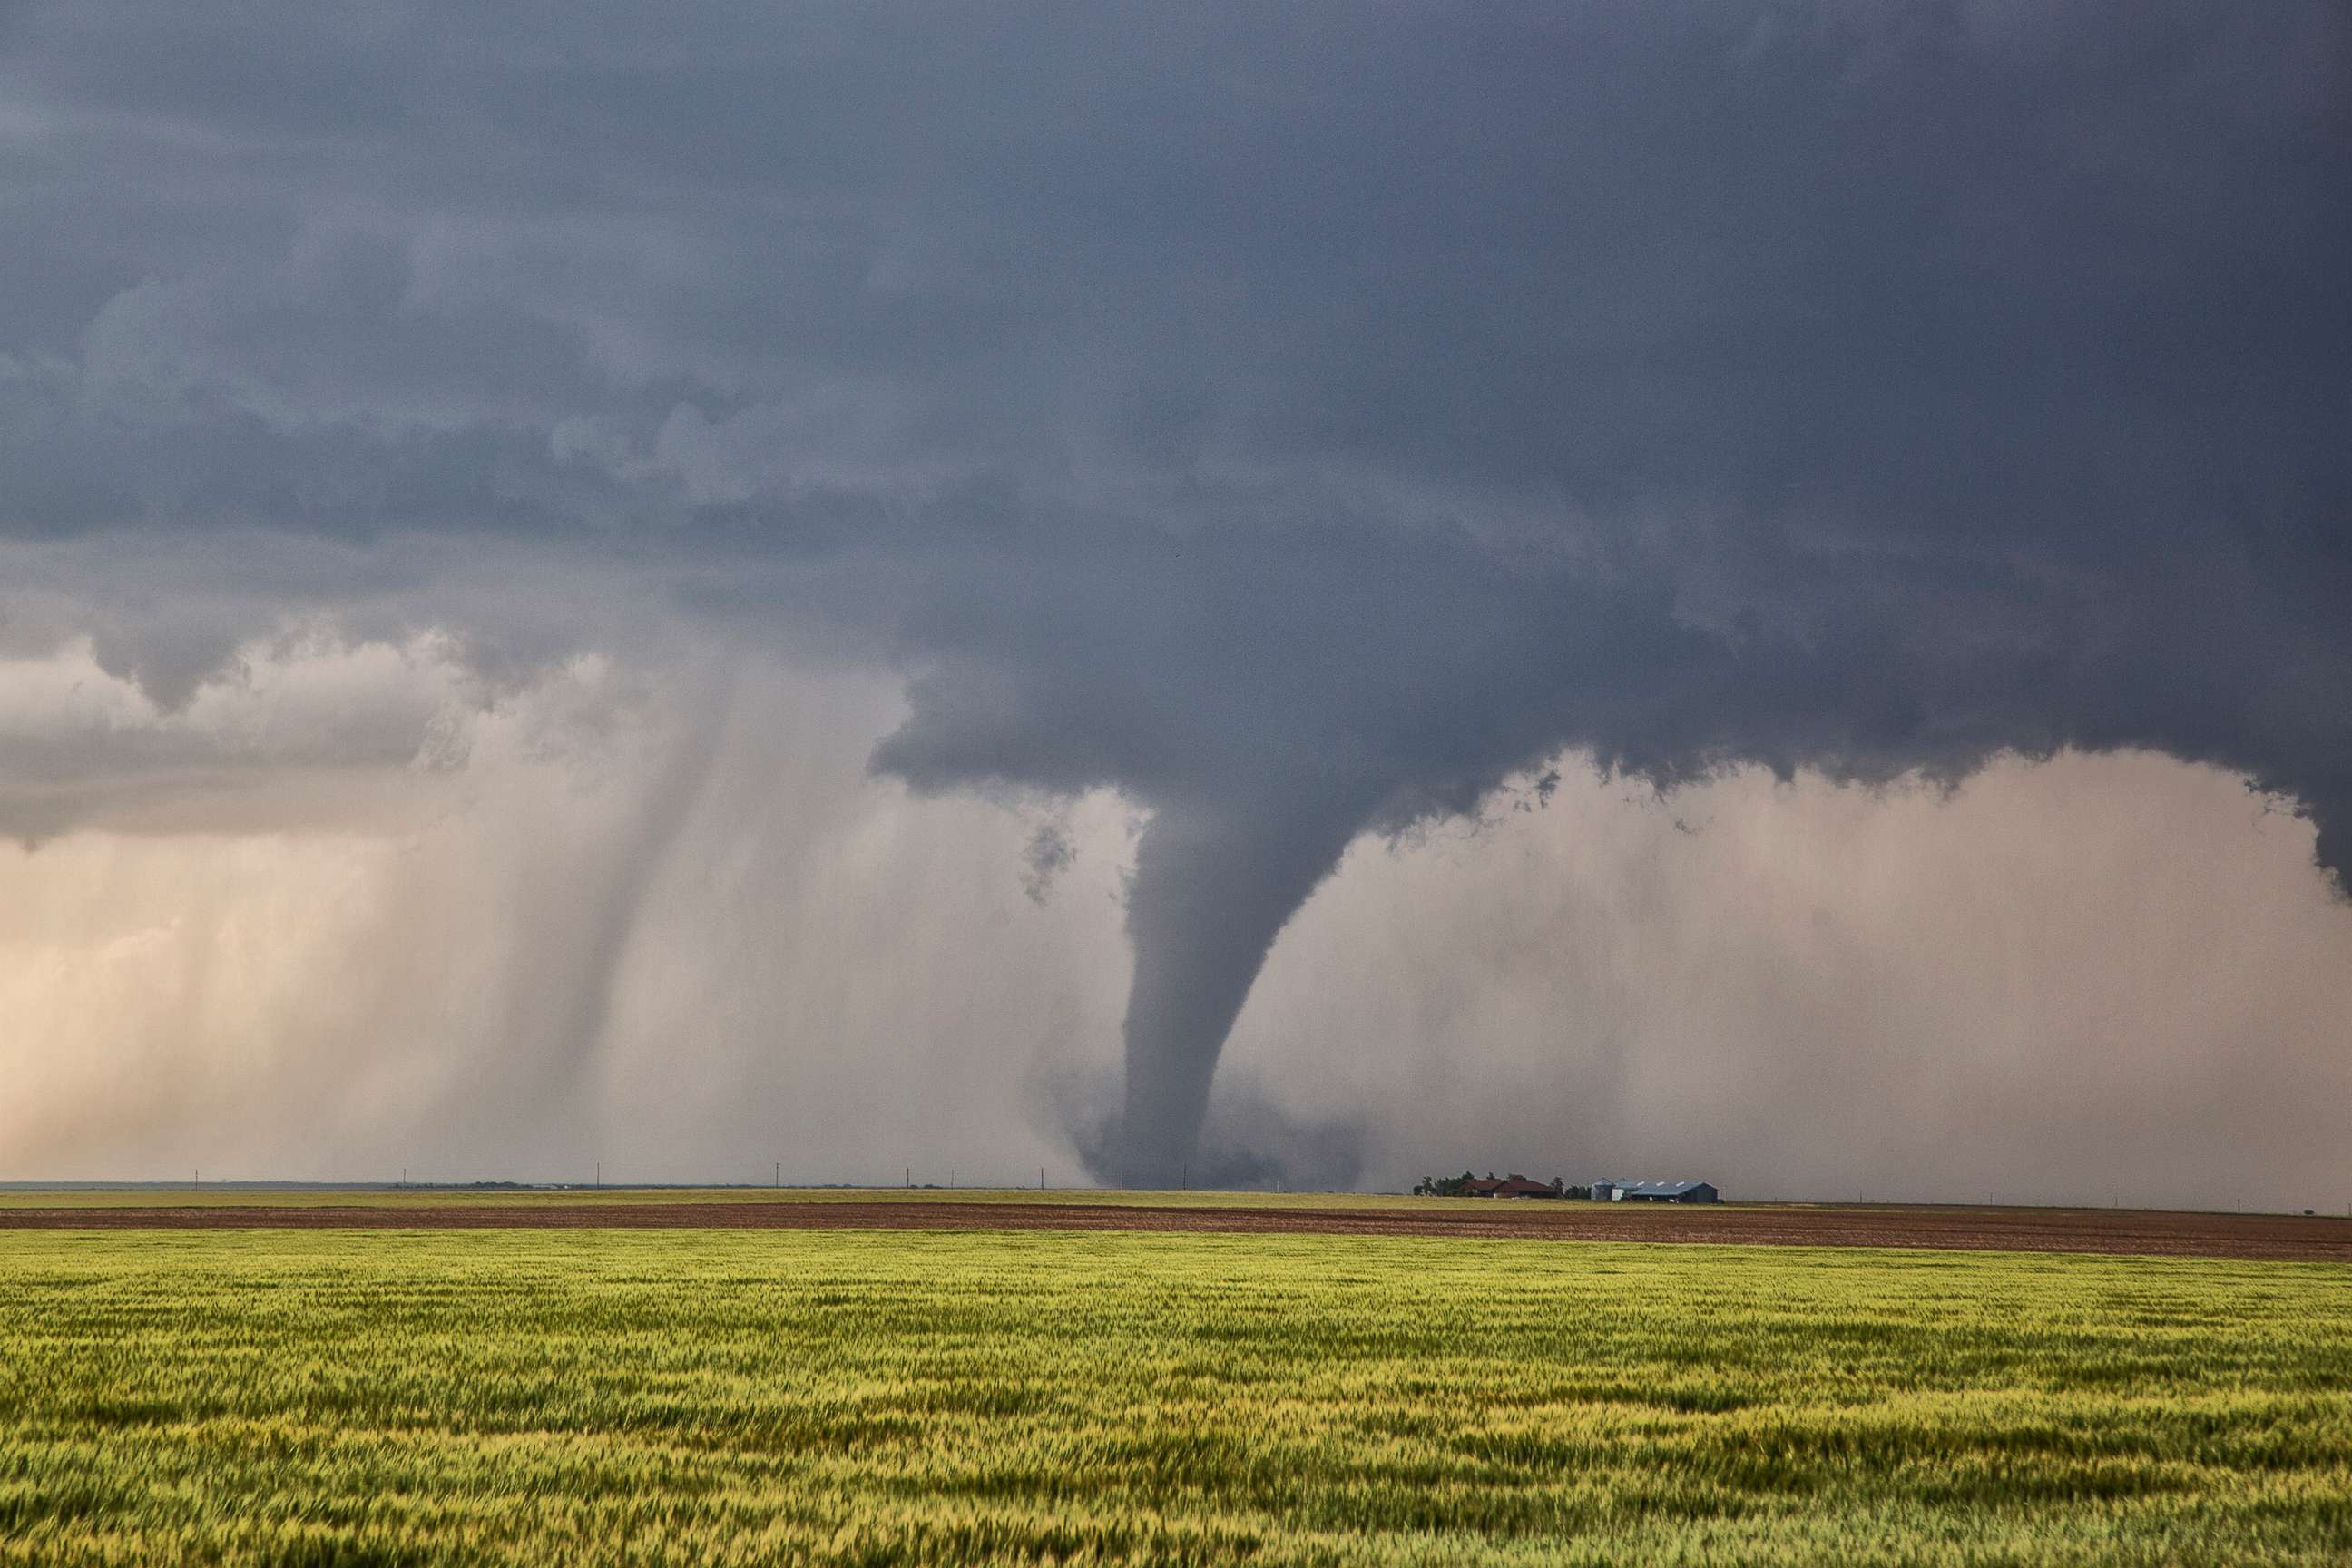 PHOTO: A tornado over a field, taken in Dodge City, Kansas, May 24, 2016.